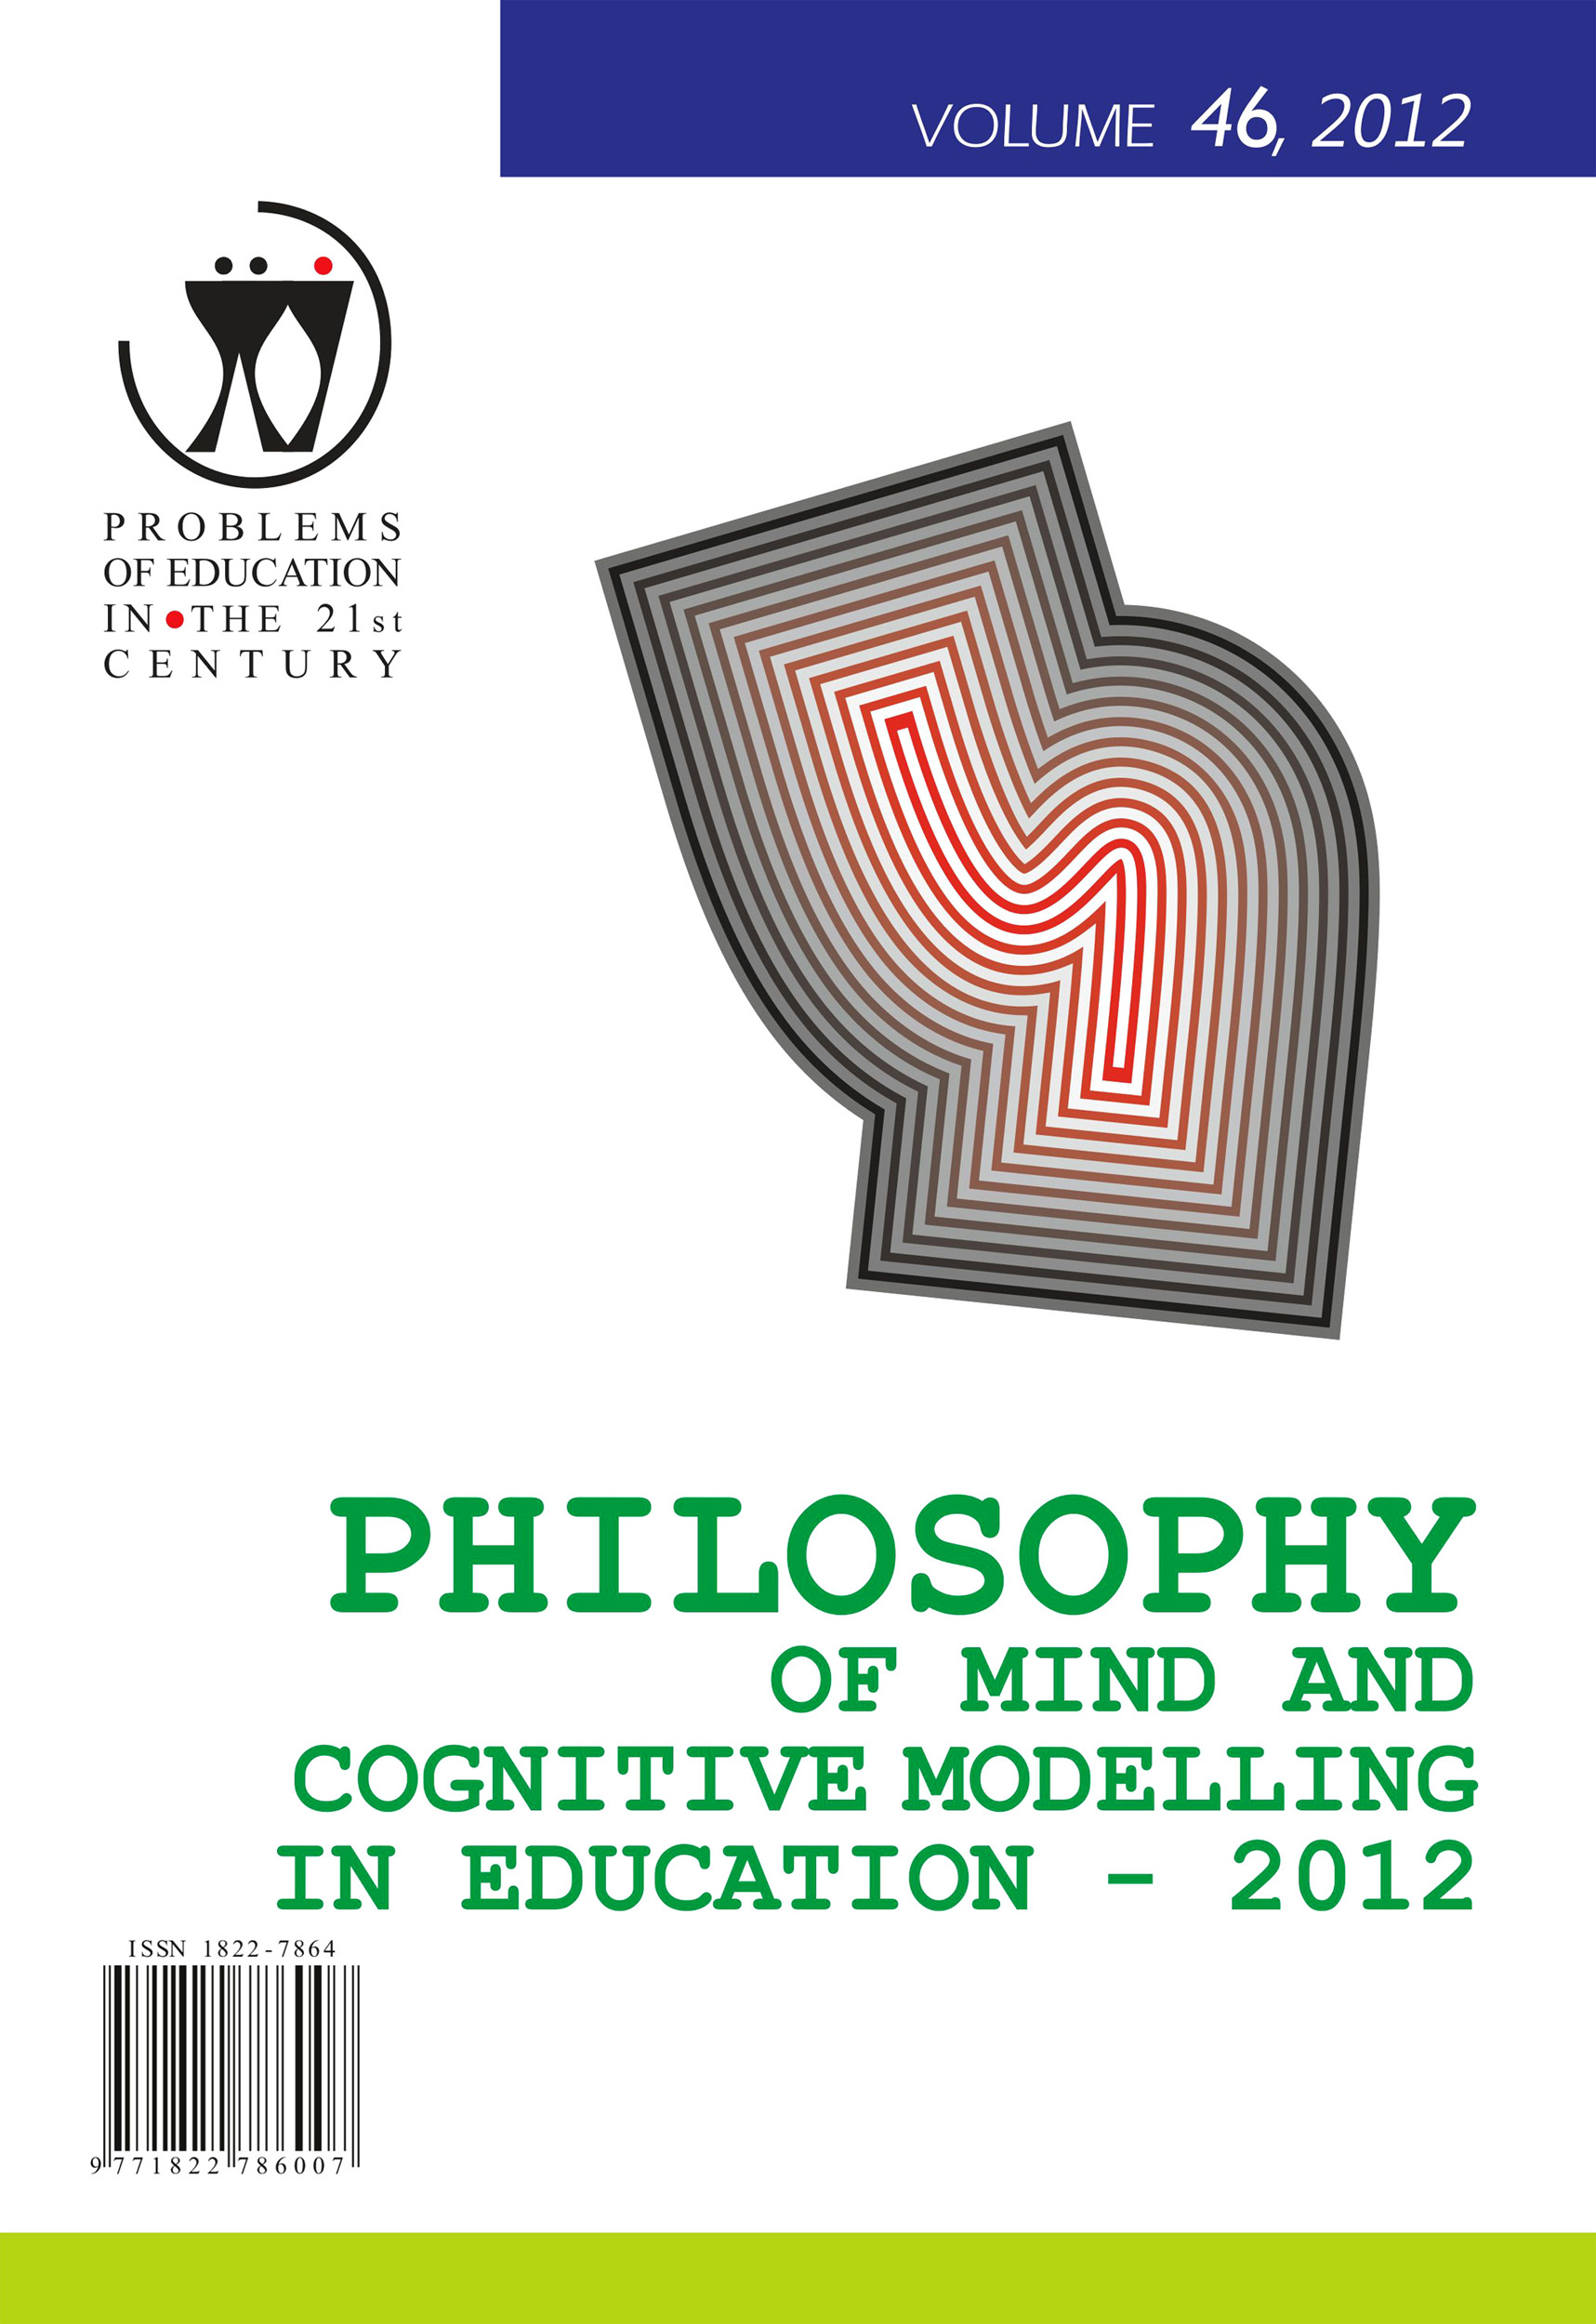 PHILOSOPHY OF MIND AND COGNITIVE MODELLING IN EDUCATION